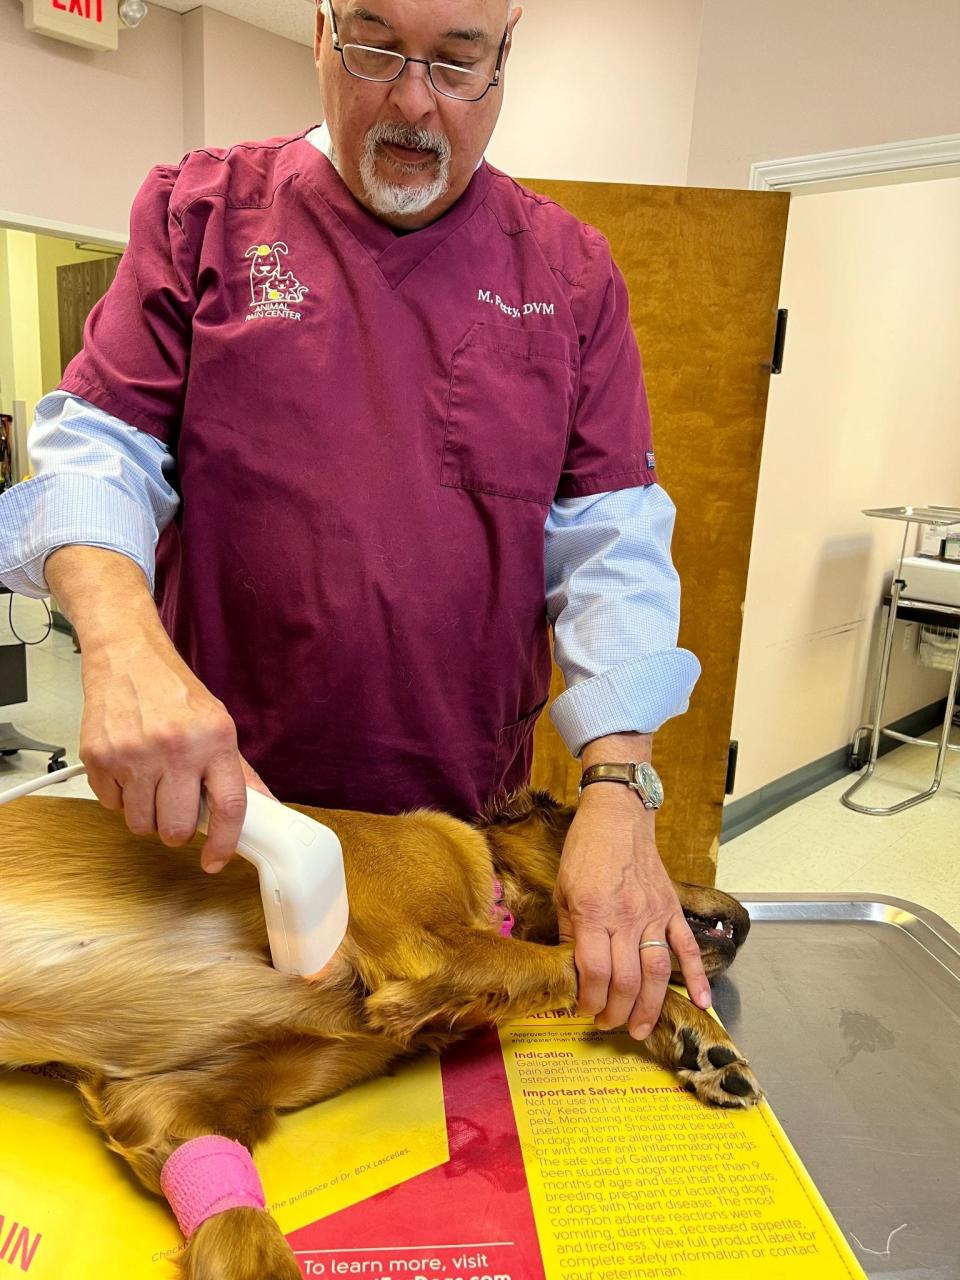 Dr. Mike Petty, a member of the Global Pain Council of the World Small Animal Veterinary Association, demonstrates a new non-invasive test to diagnose skin cancers in dogs at the Veterinary Meeting & Expo.